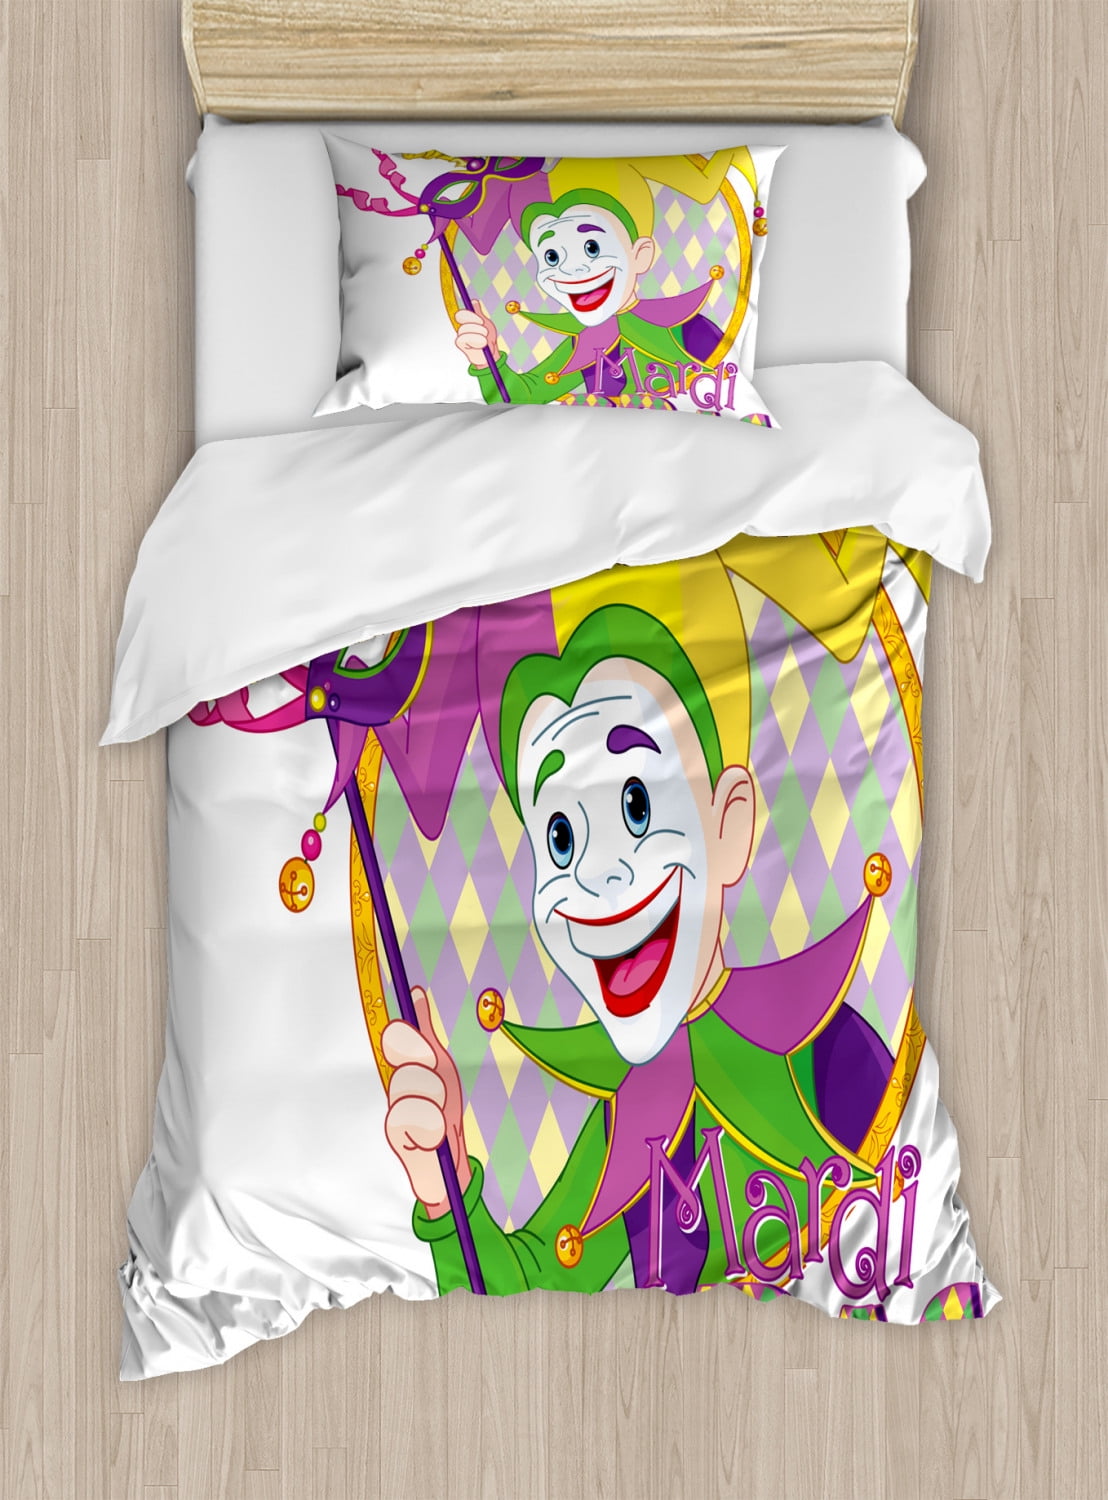 Mardi Gras Twin Size Duvet Cover Set, Cartoon Design of Mardi Gras and Holding a Mask Harlequin Figure, Decorative 2 Piece Bedding Set with 1 Pillow Sham, by Ambesonne -